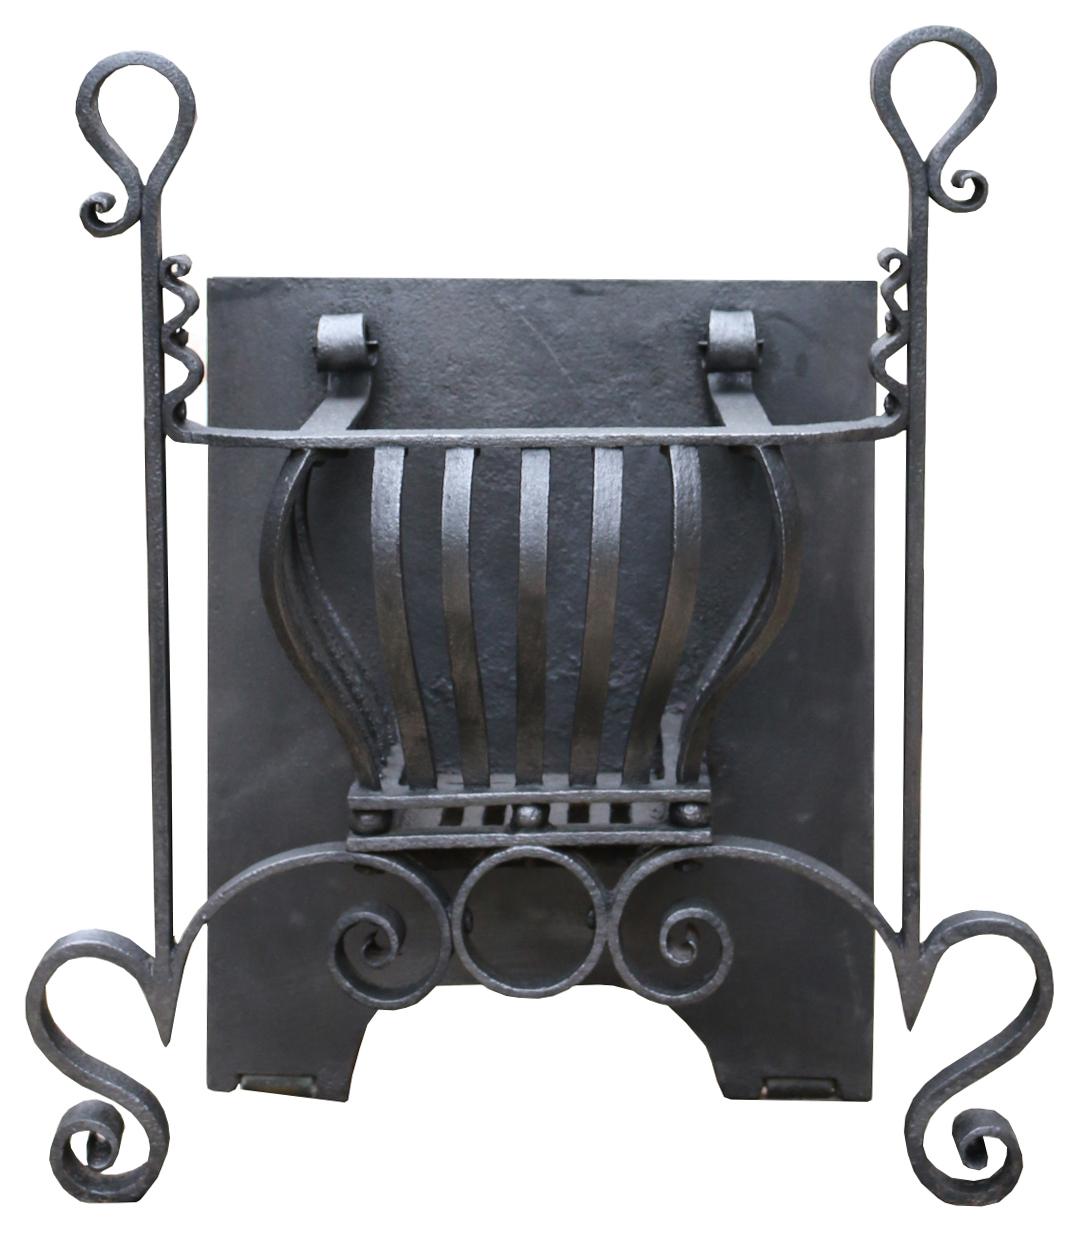 An English Arts and Crafts Movement fire grate. Blacksmith made, with scroll decoration.